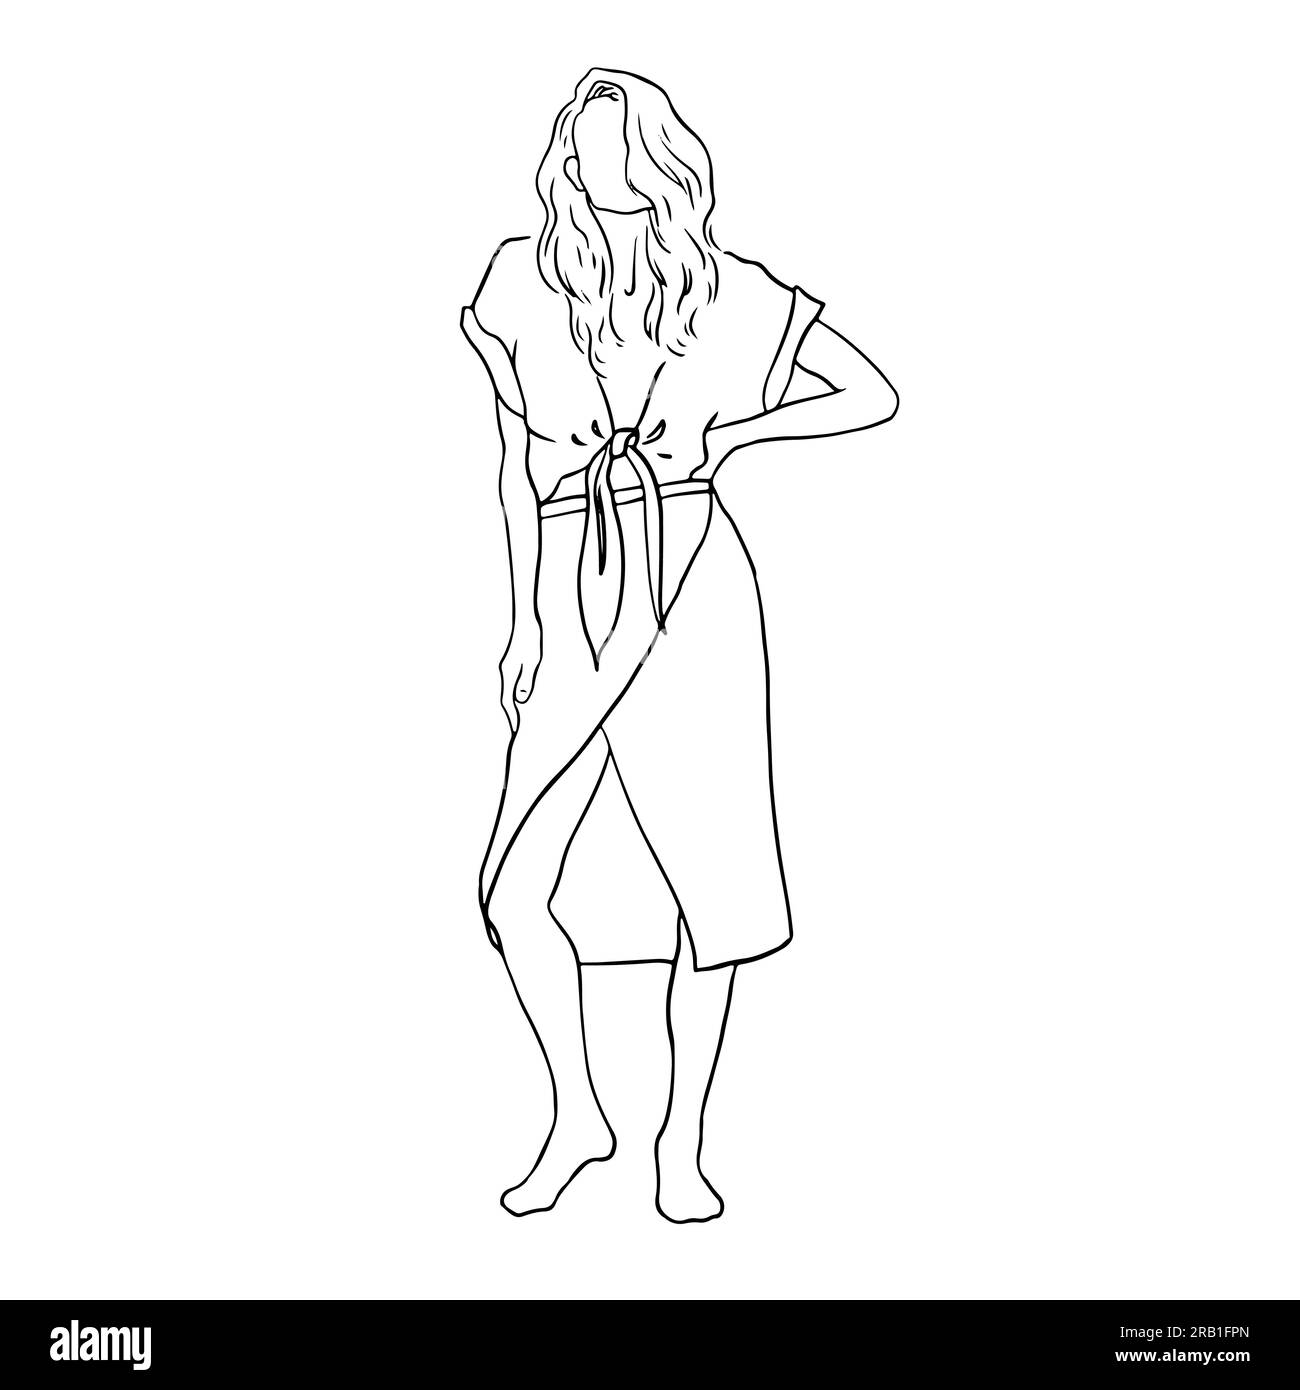 Summer fashion sketch vector art illustration. Line art drawing. Beautiful young girl in summer outfit . Stylized hand drawn ink painting. Stock Vector